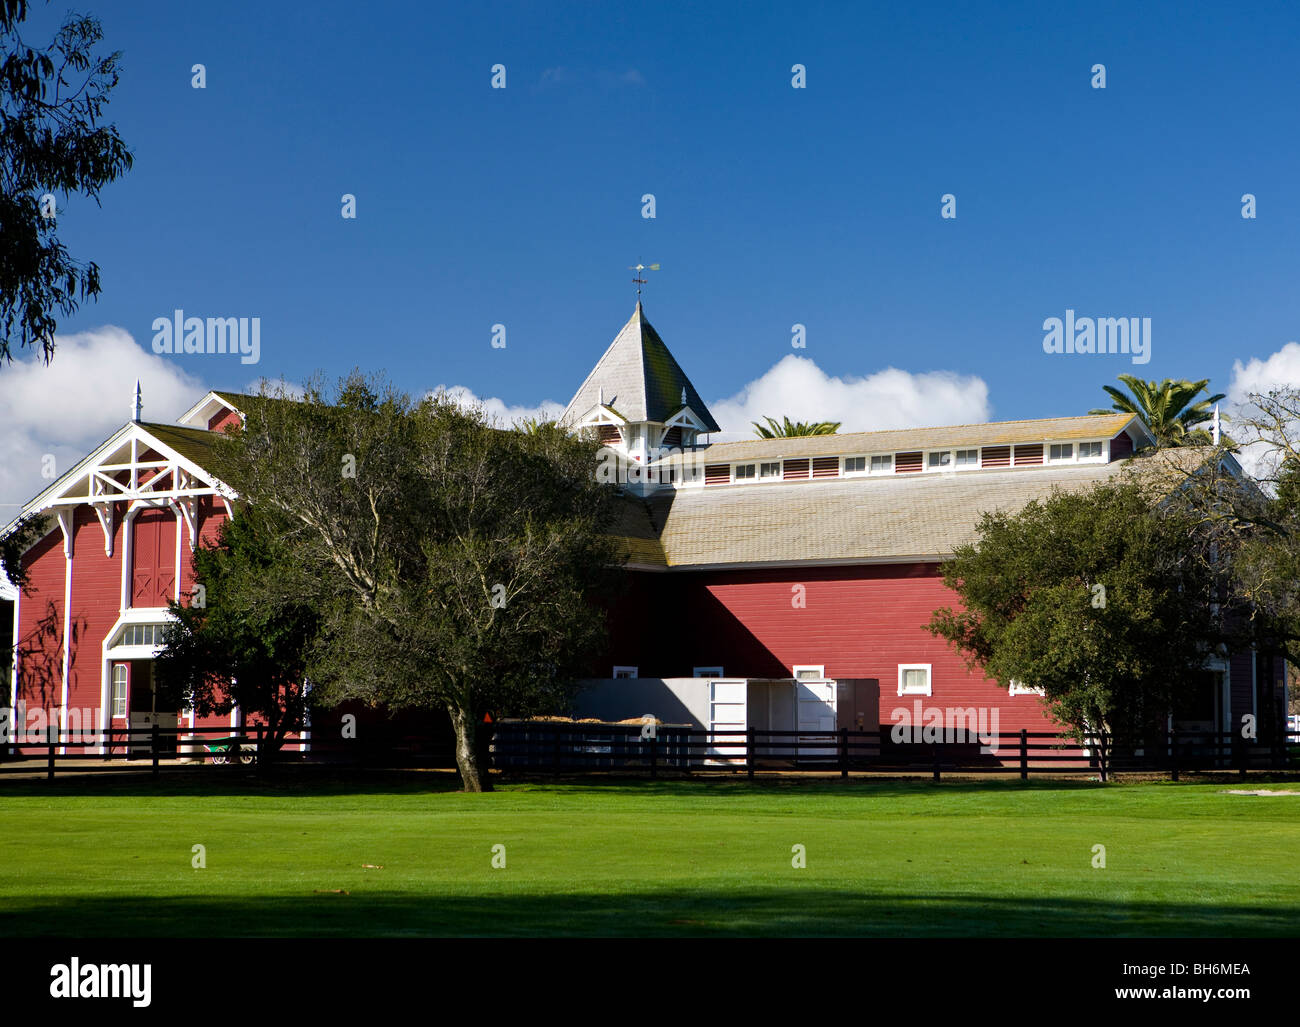 The Red Barn, Stanford University, Stanford California, United States of America. Stock Photo